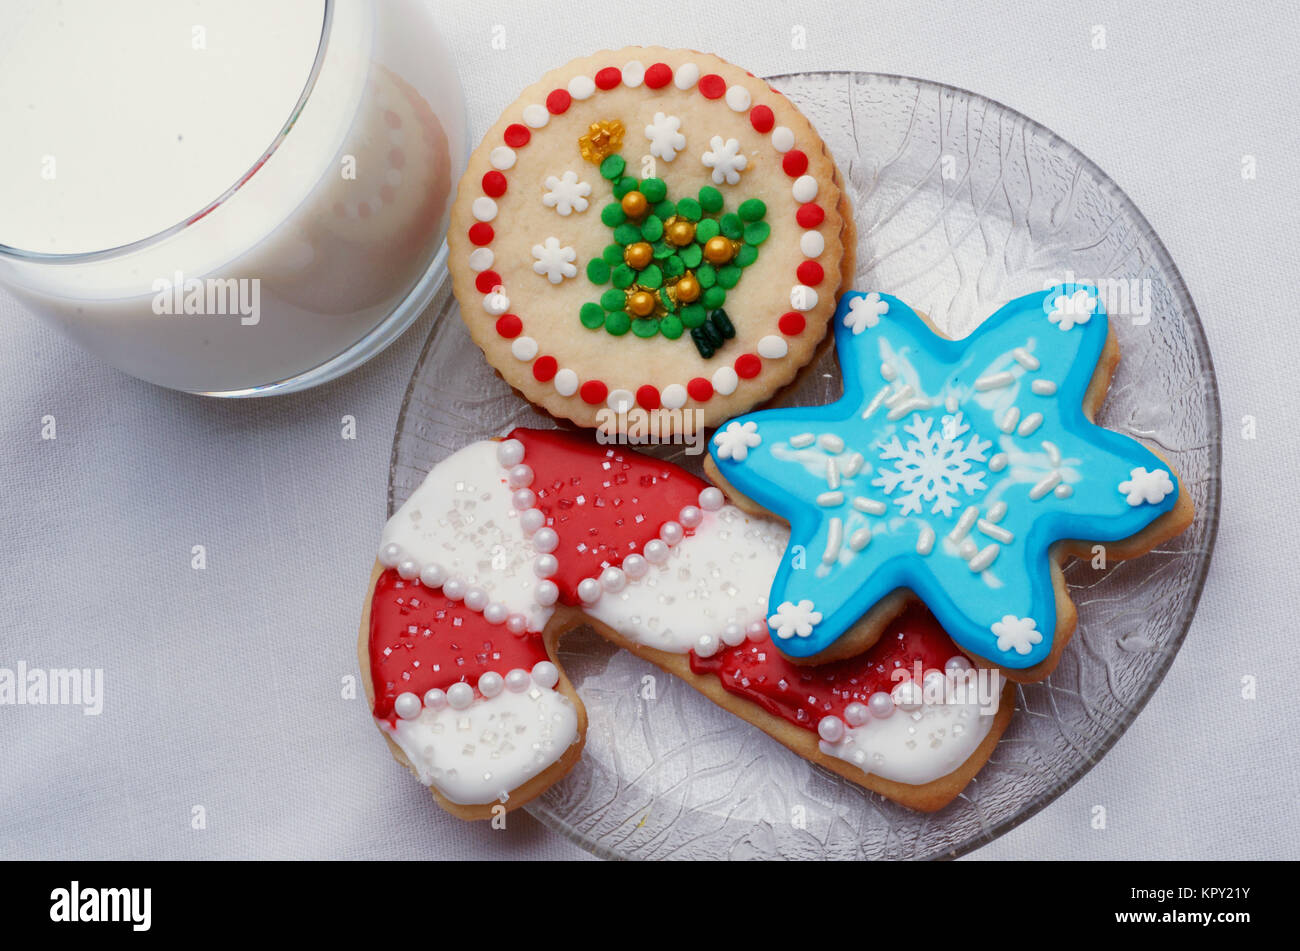 Three Christmas Cut Out Cookies On A Glass Plate With A Glass Of Milk Stock Photo